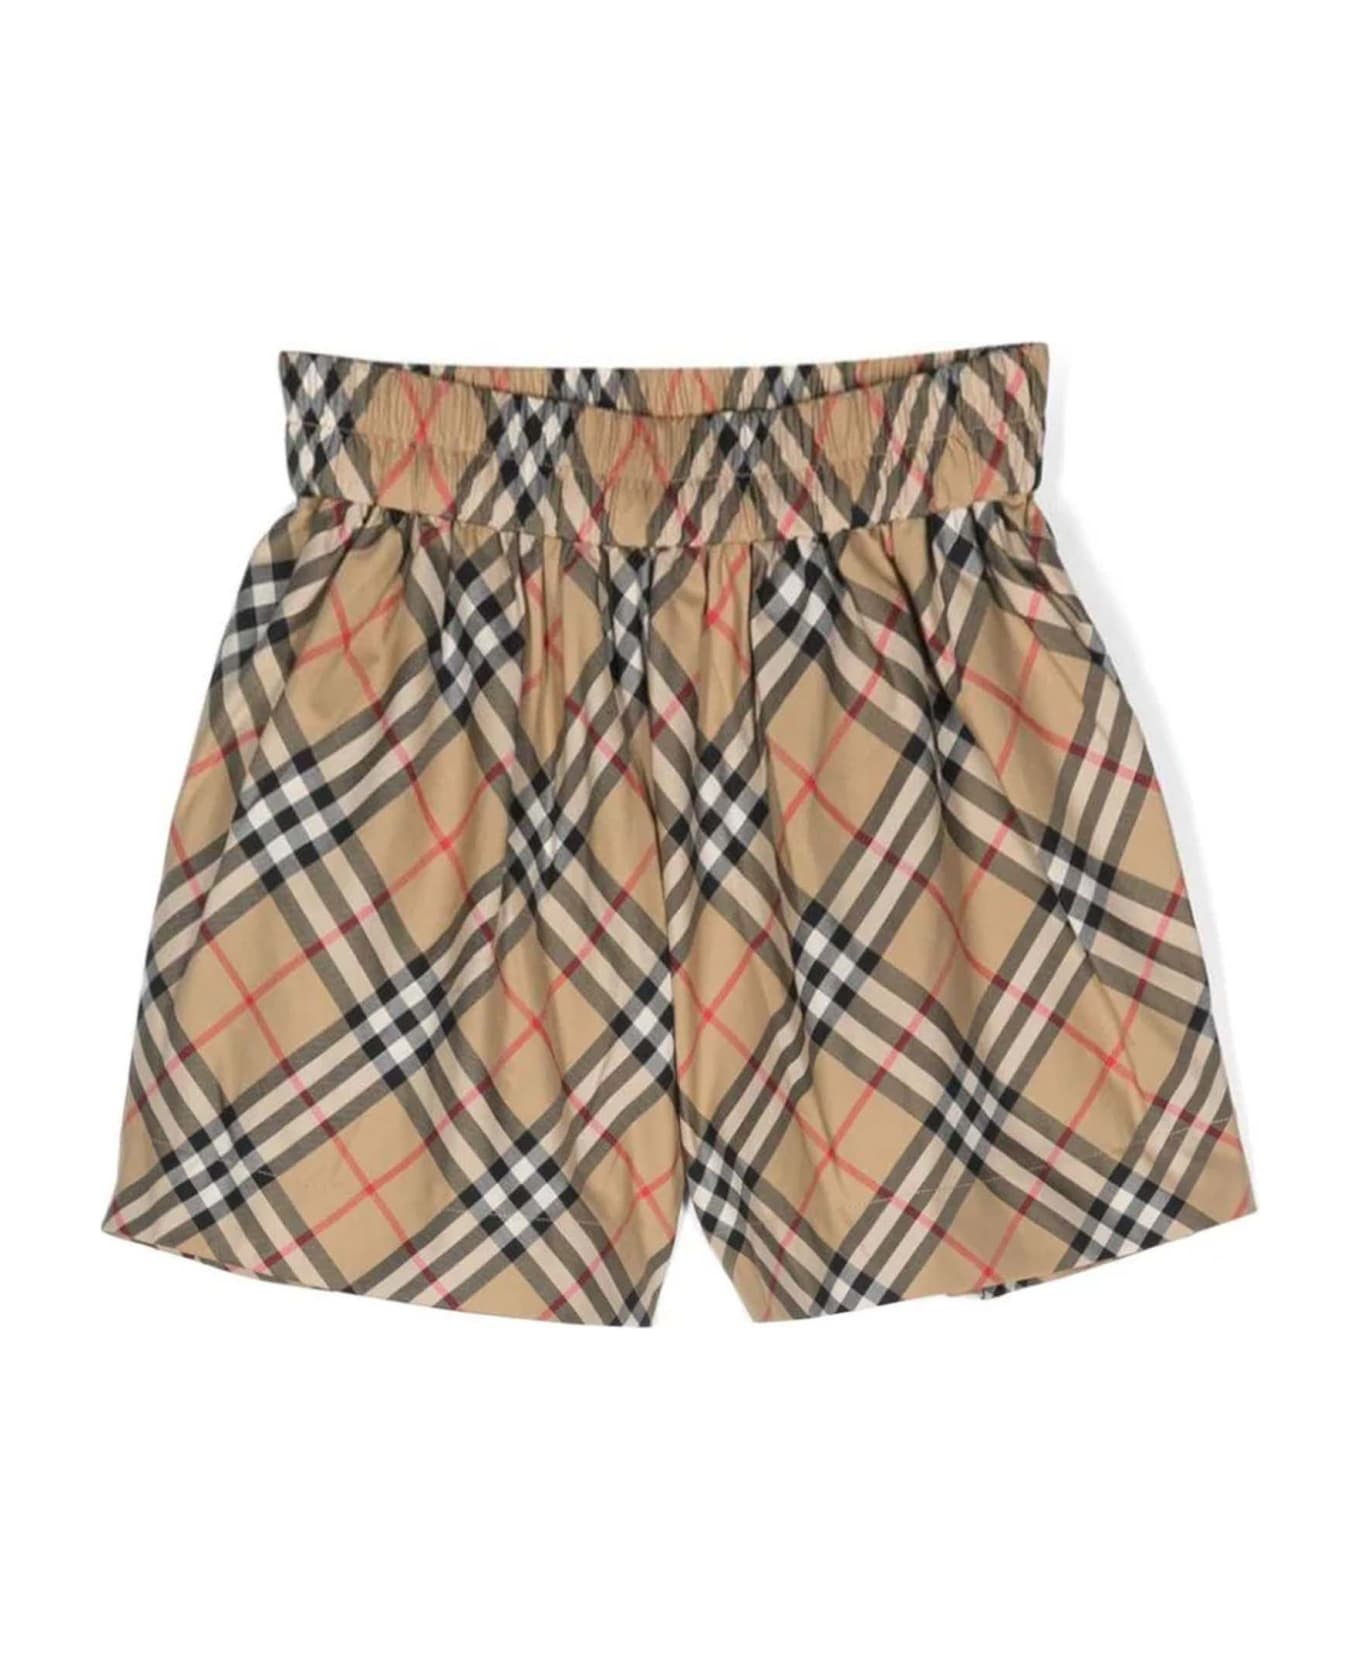 Burberry Vintage Check-pattern Cotton Shorts - Archive Beige Ip Check